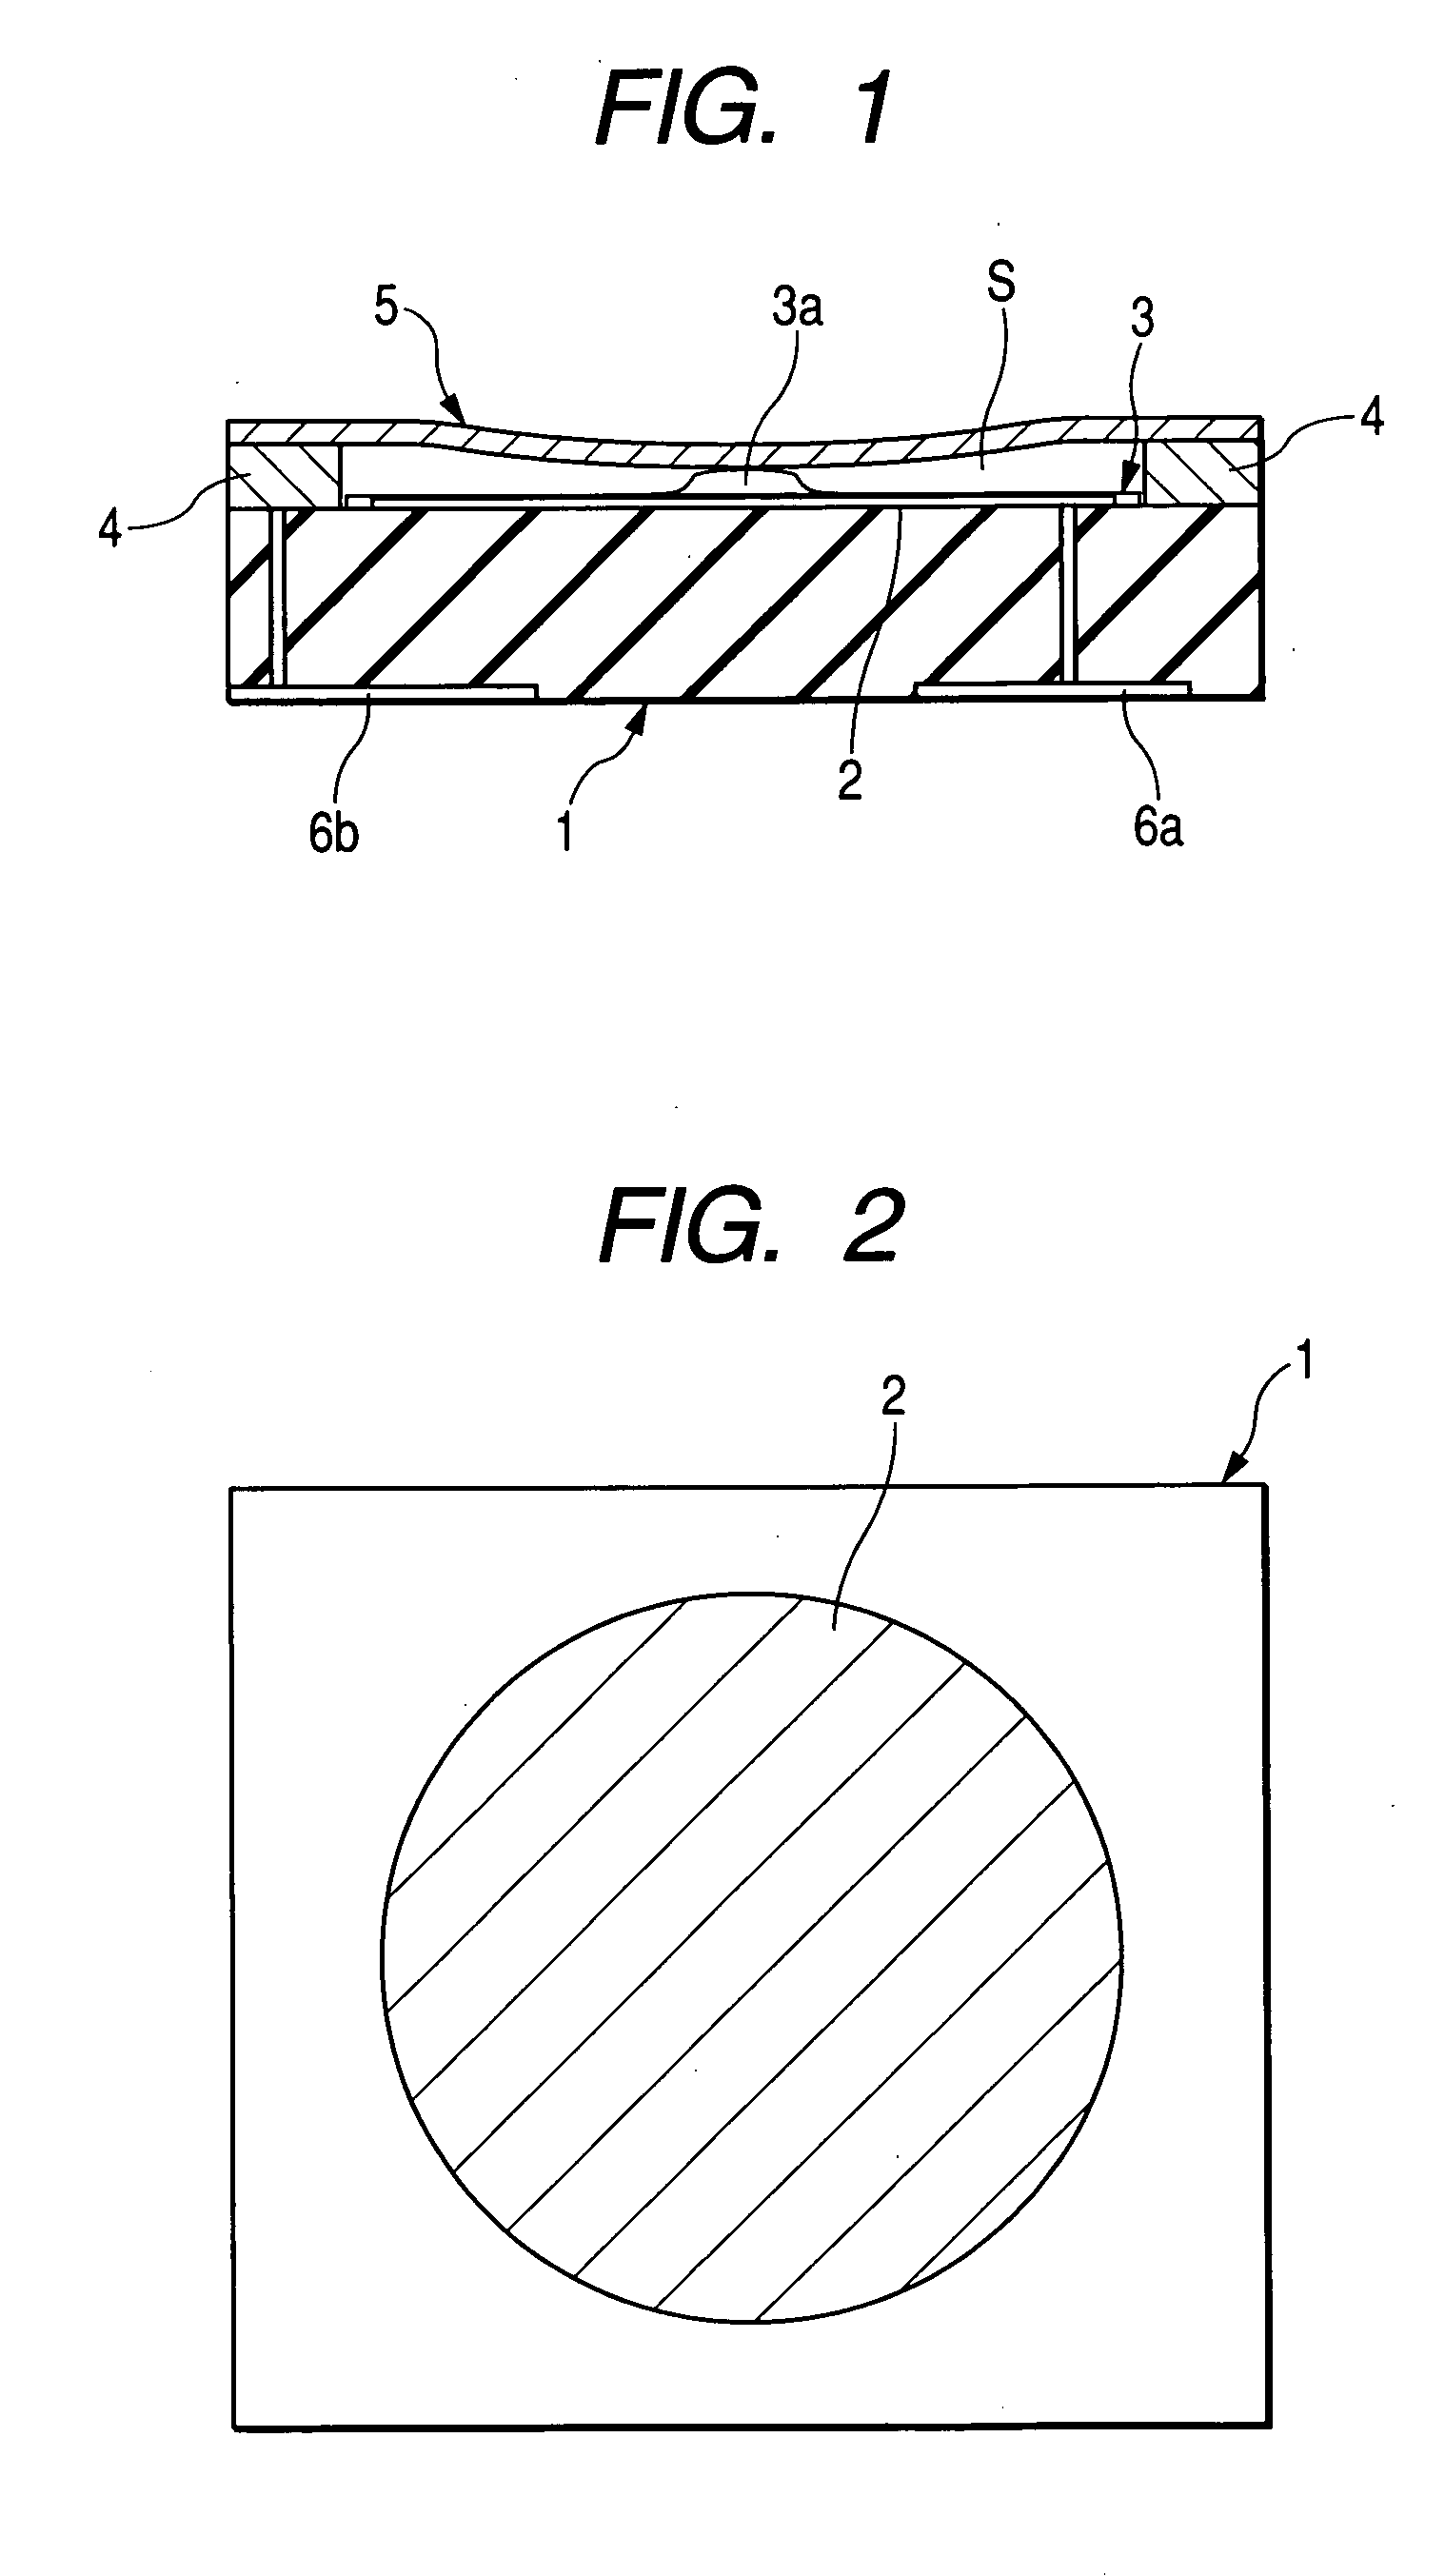 Pressure sensor for detecting pressure by using capacitance variation according to deflection of diaphragm